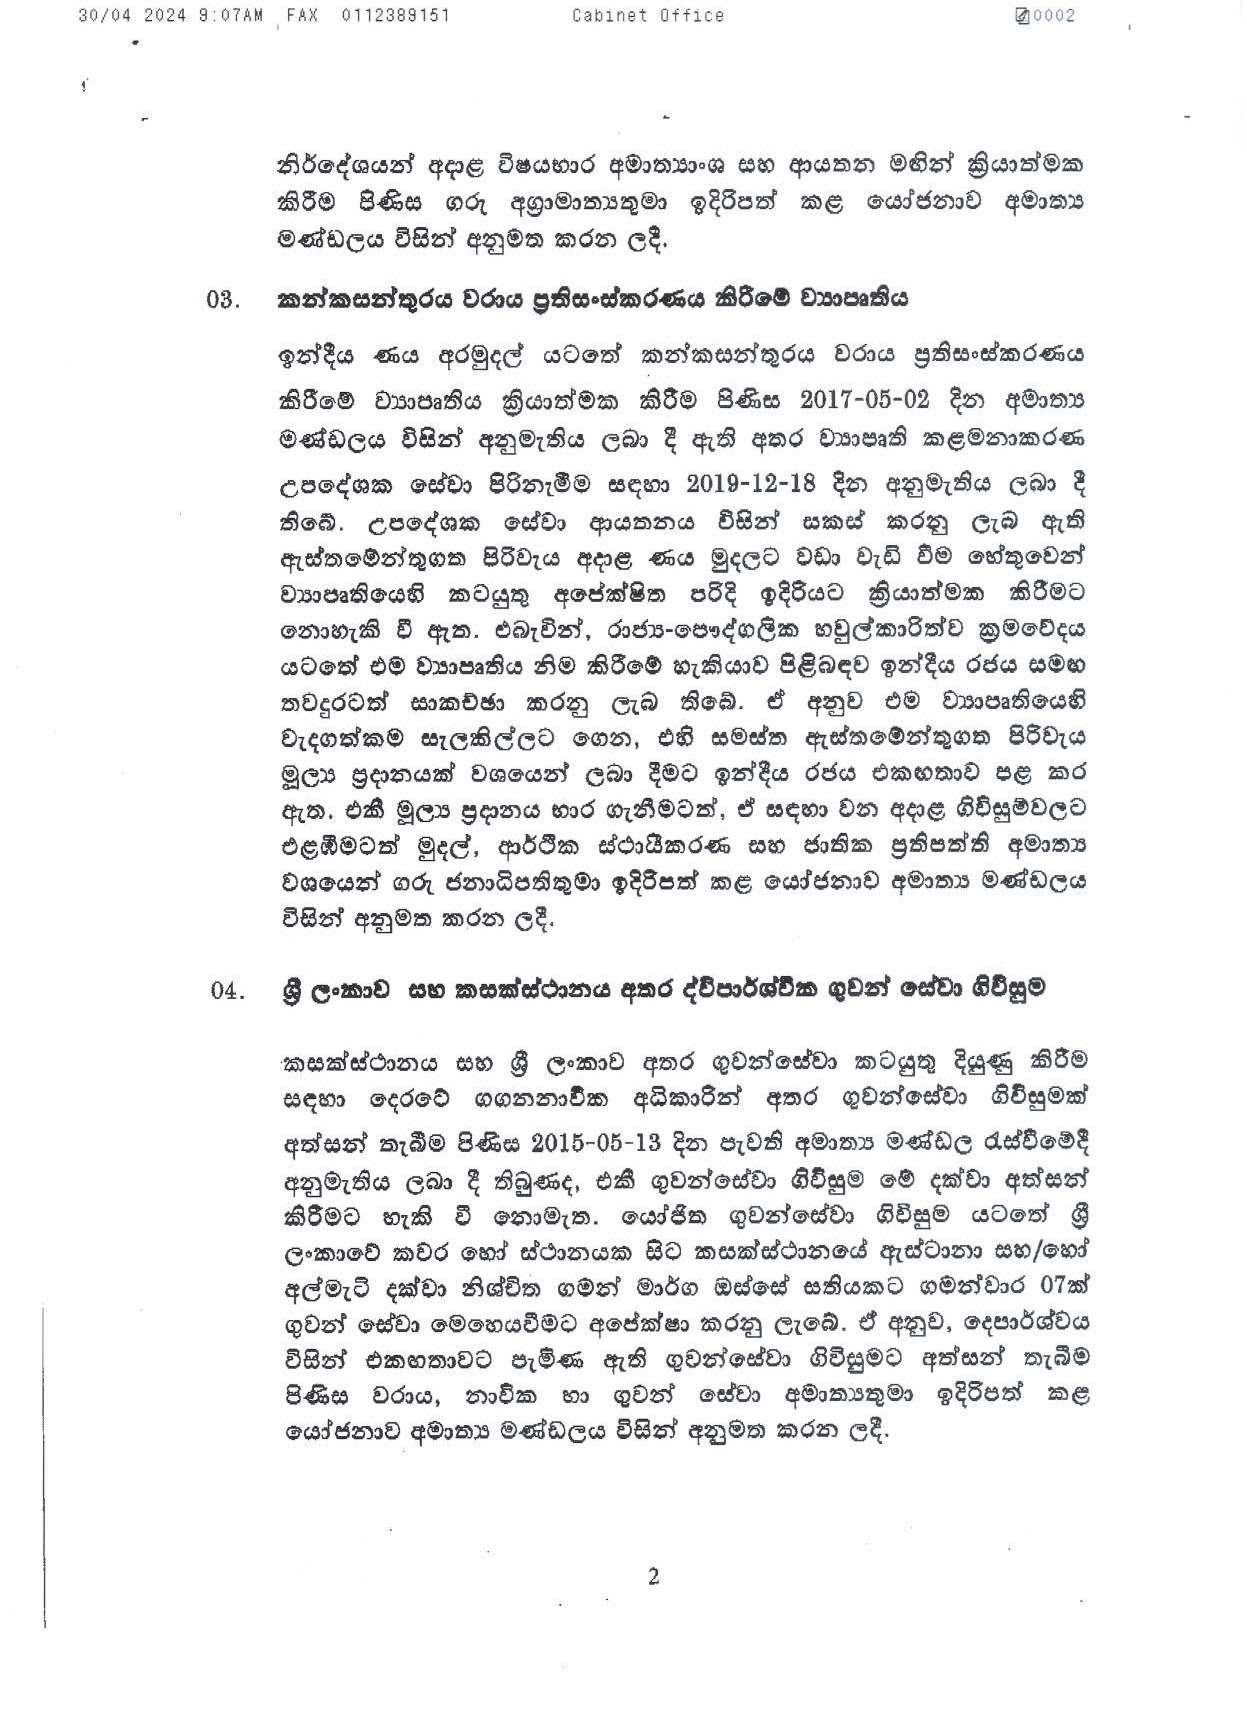 Cabinet Decision on 29.04.2024 page 002